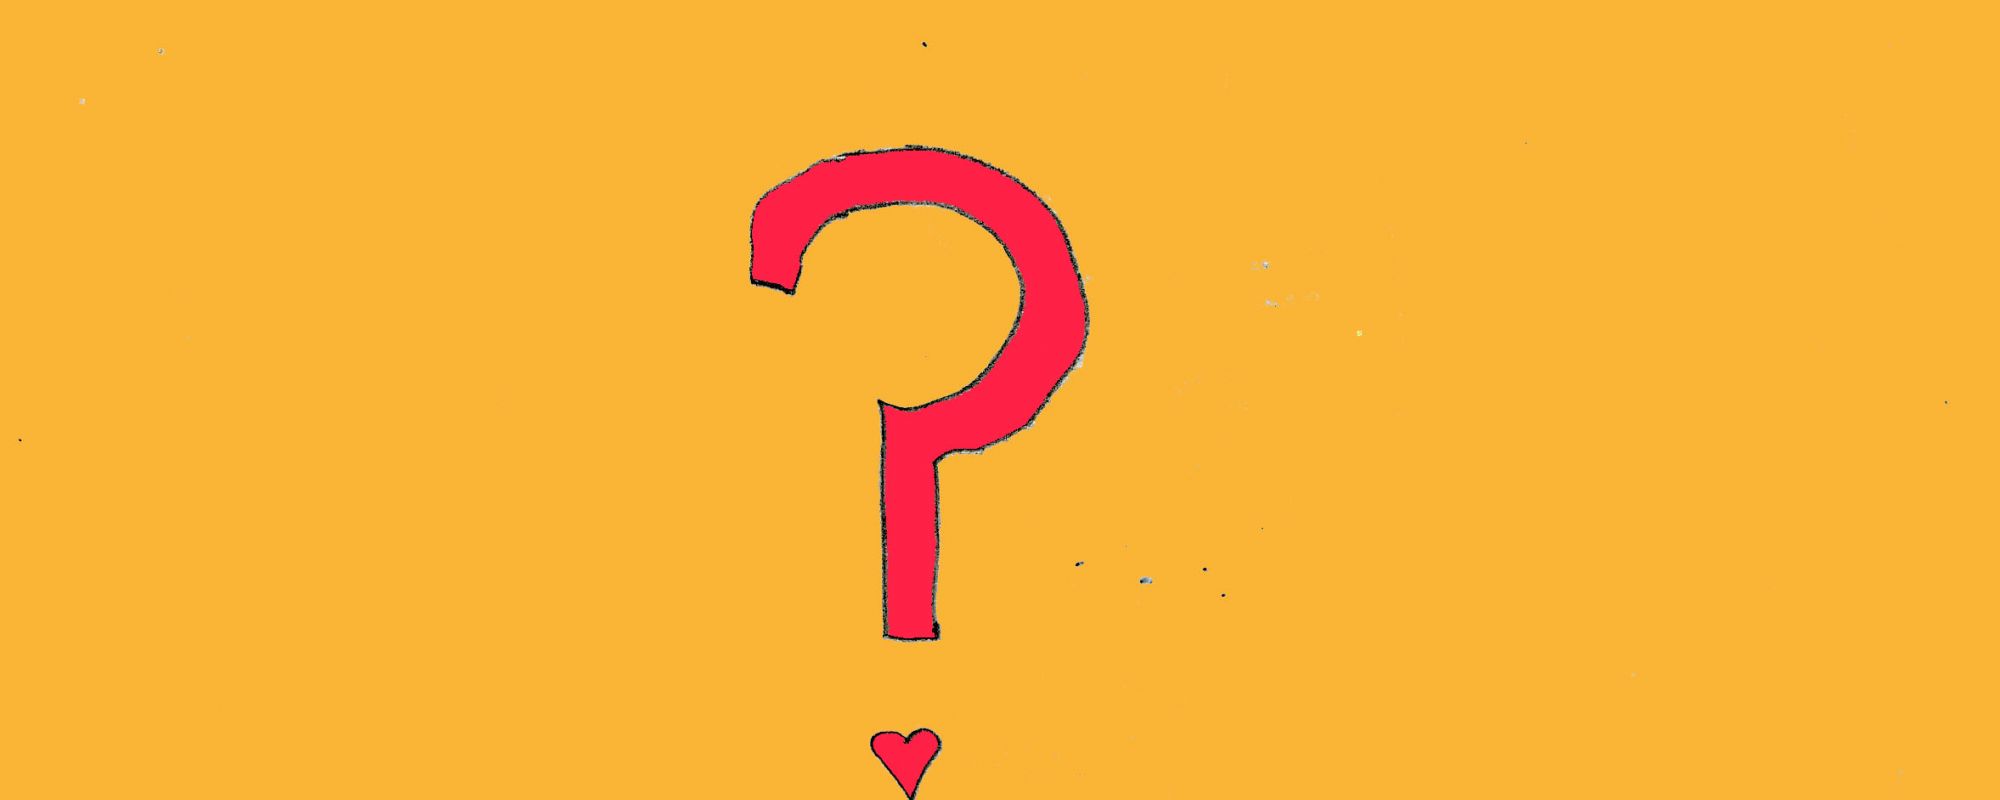 Red question mark on an orange background